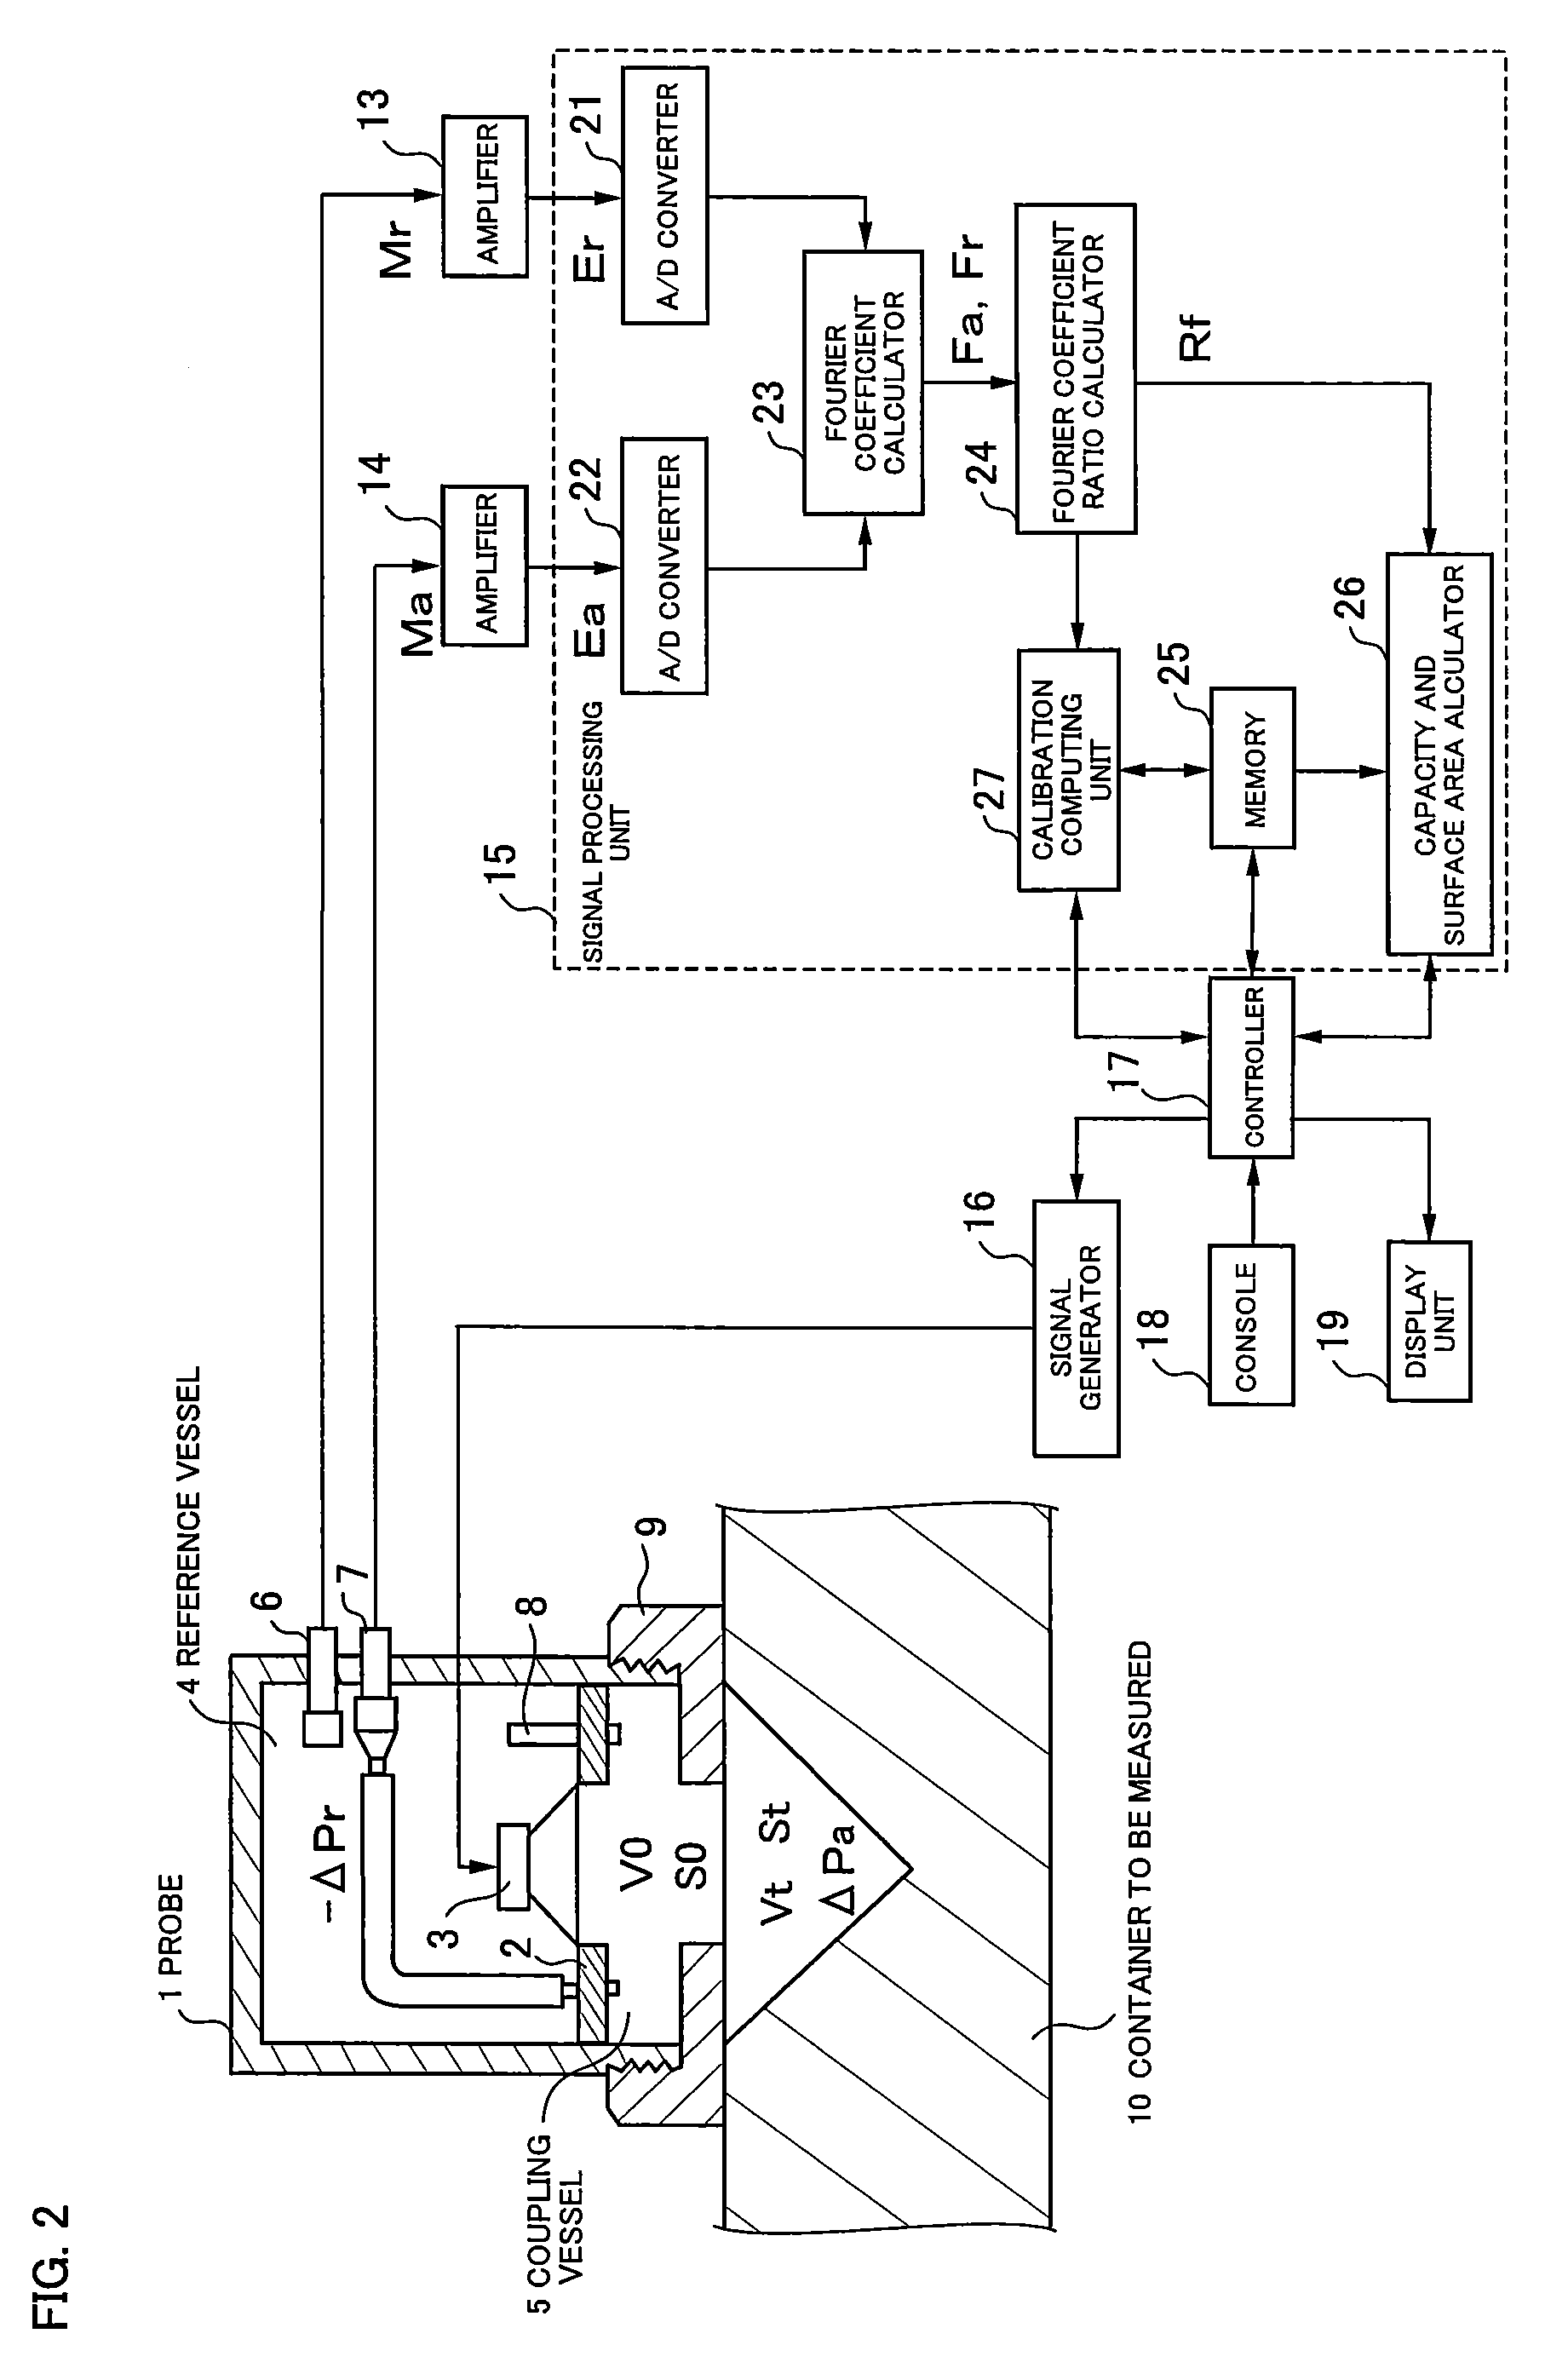 Acoustic capacity, volume, and surface area measurement method